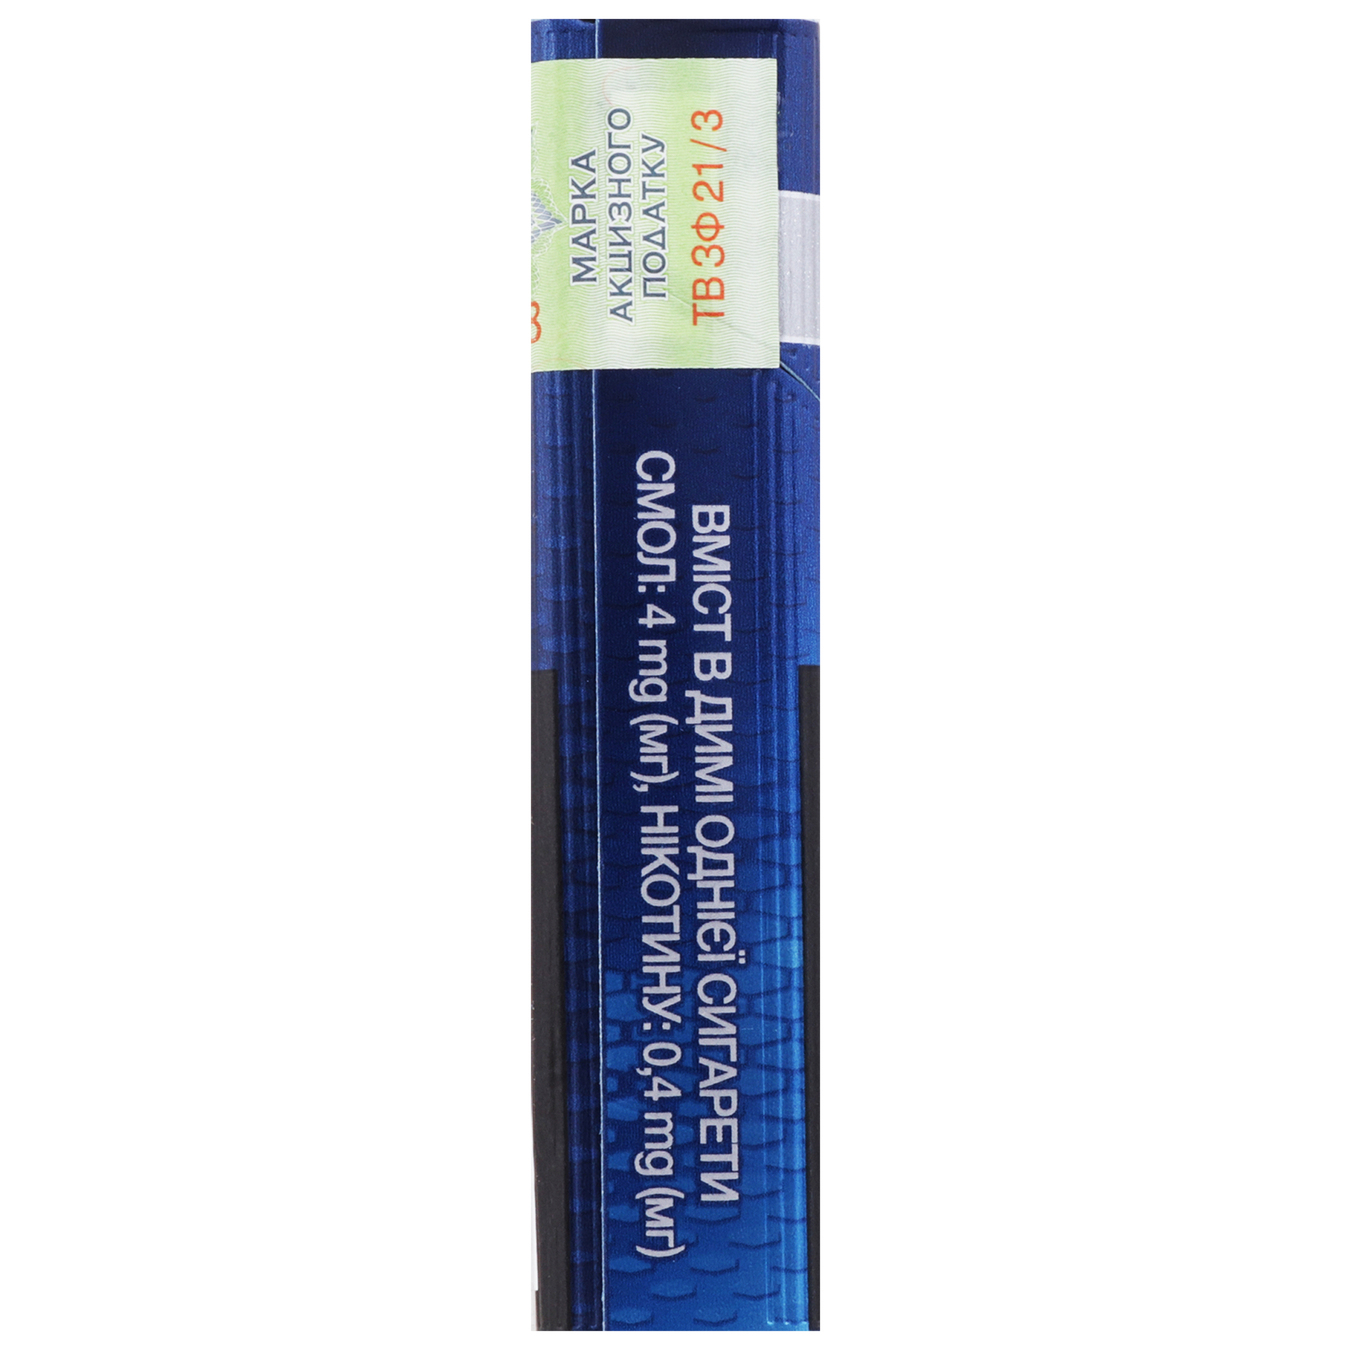 Rothmans Royals Silver cigarettes with filter 20 pcs (the price is indicated without excise tax) 2